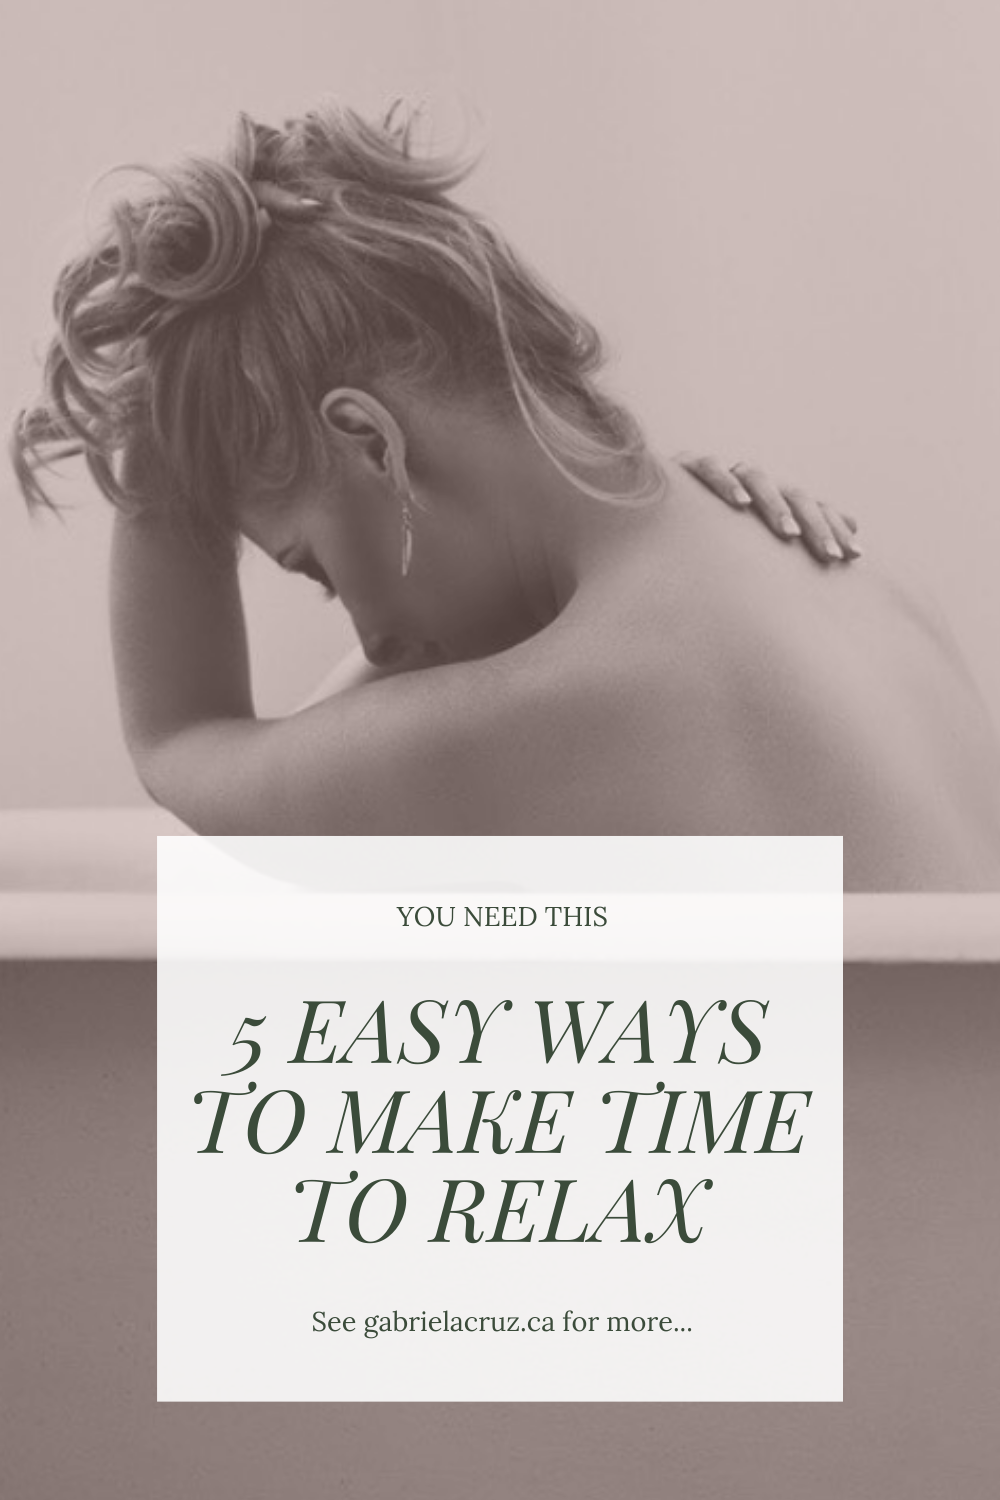 Relaxing isn't easy in our busy world. Here are 5 easy ways to add more relaxation to your hectic life.

#relax #selfcare #relaxation #self-care #howtorelax